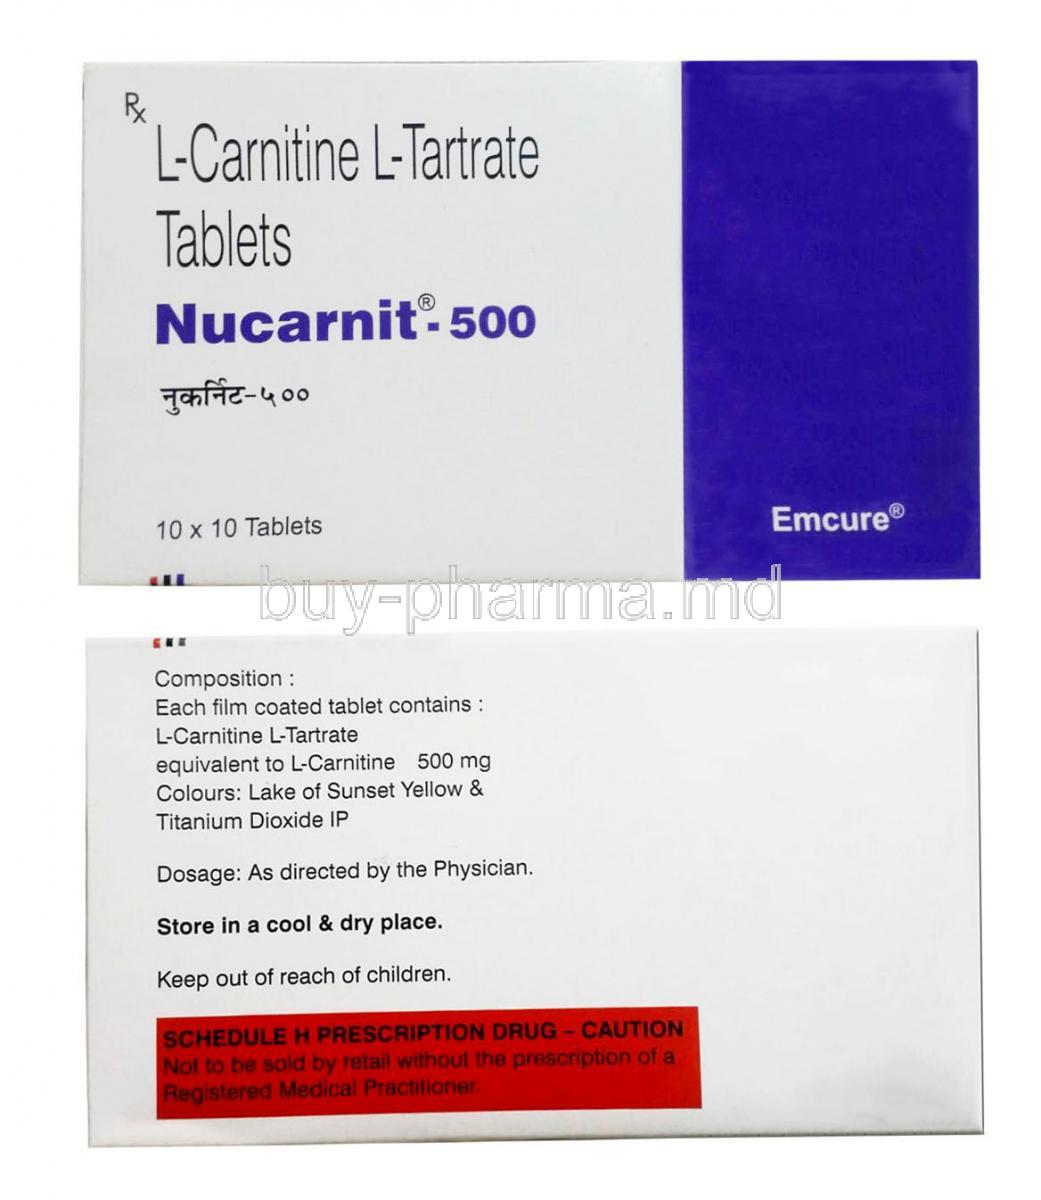 Nucarnit, L-Carnitine 330mg, Emcure Pharma, Box front view, Box back view